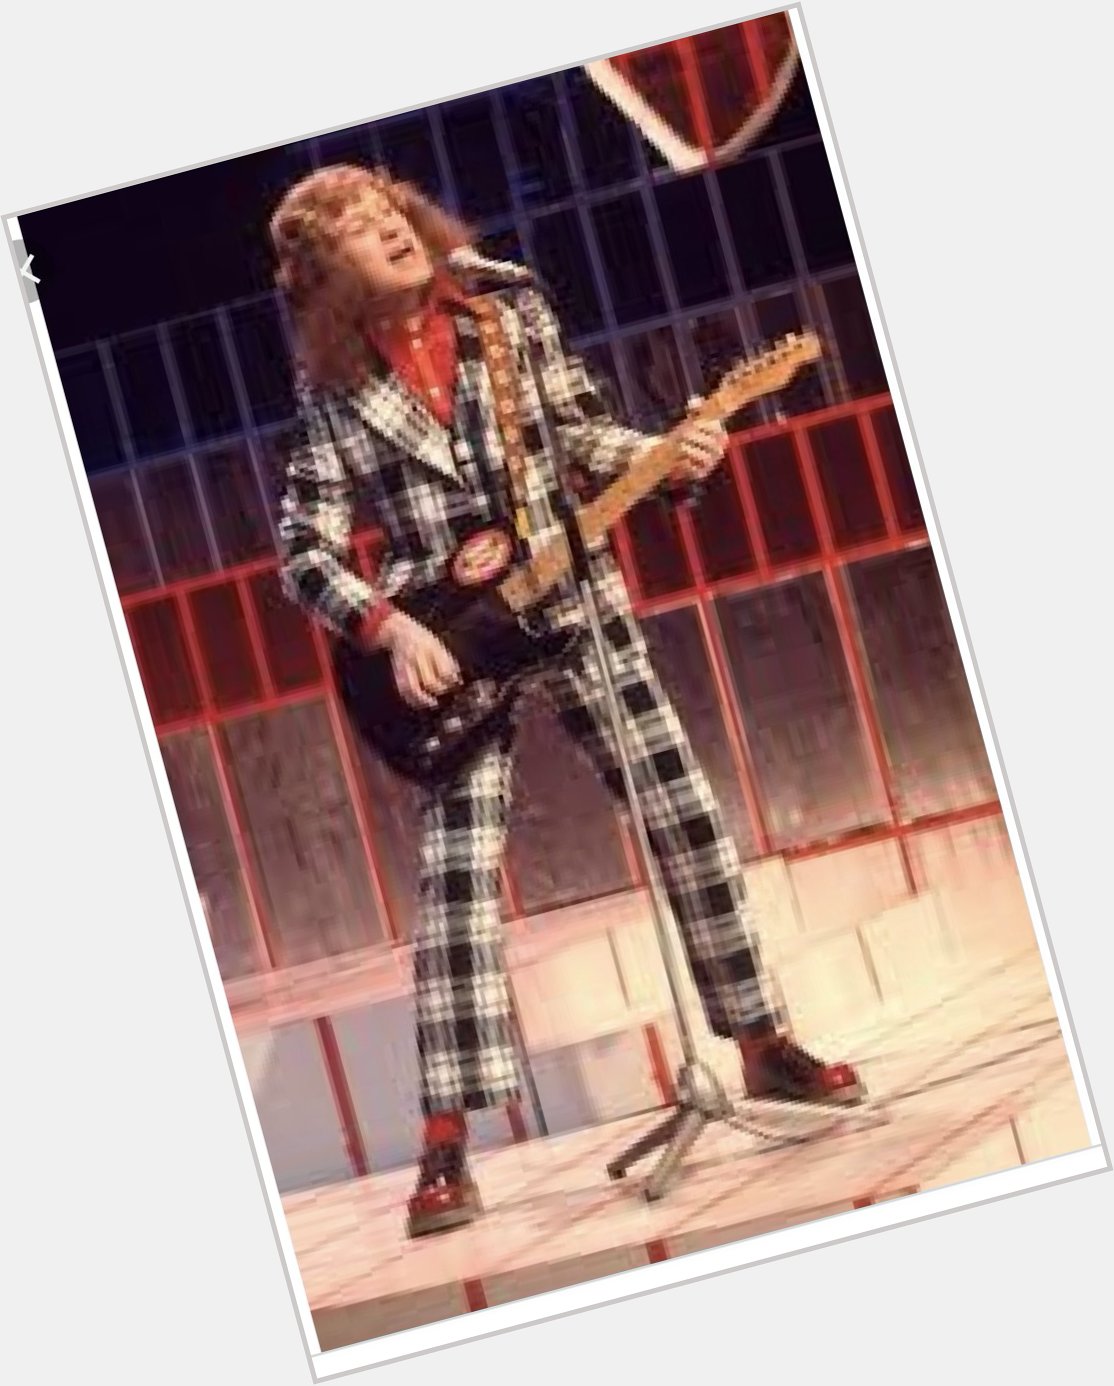 Happy birthday to my all time legend noddy holder 73 today 